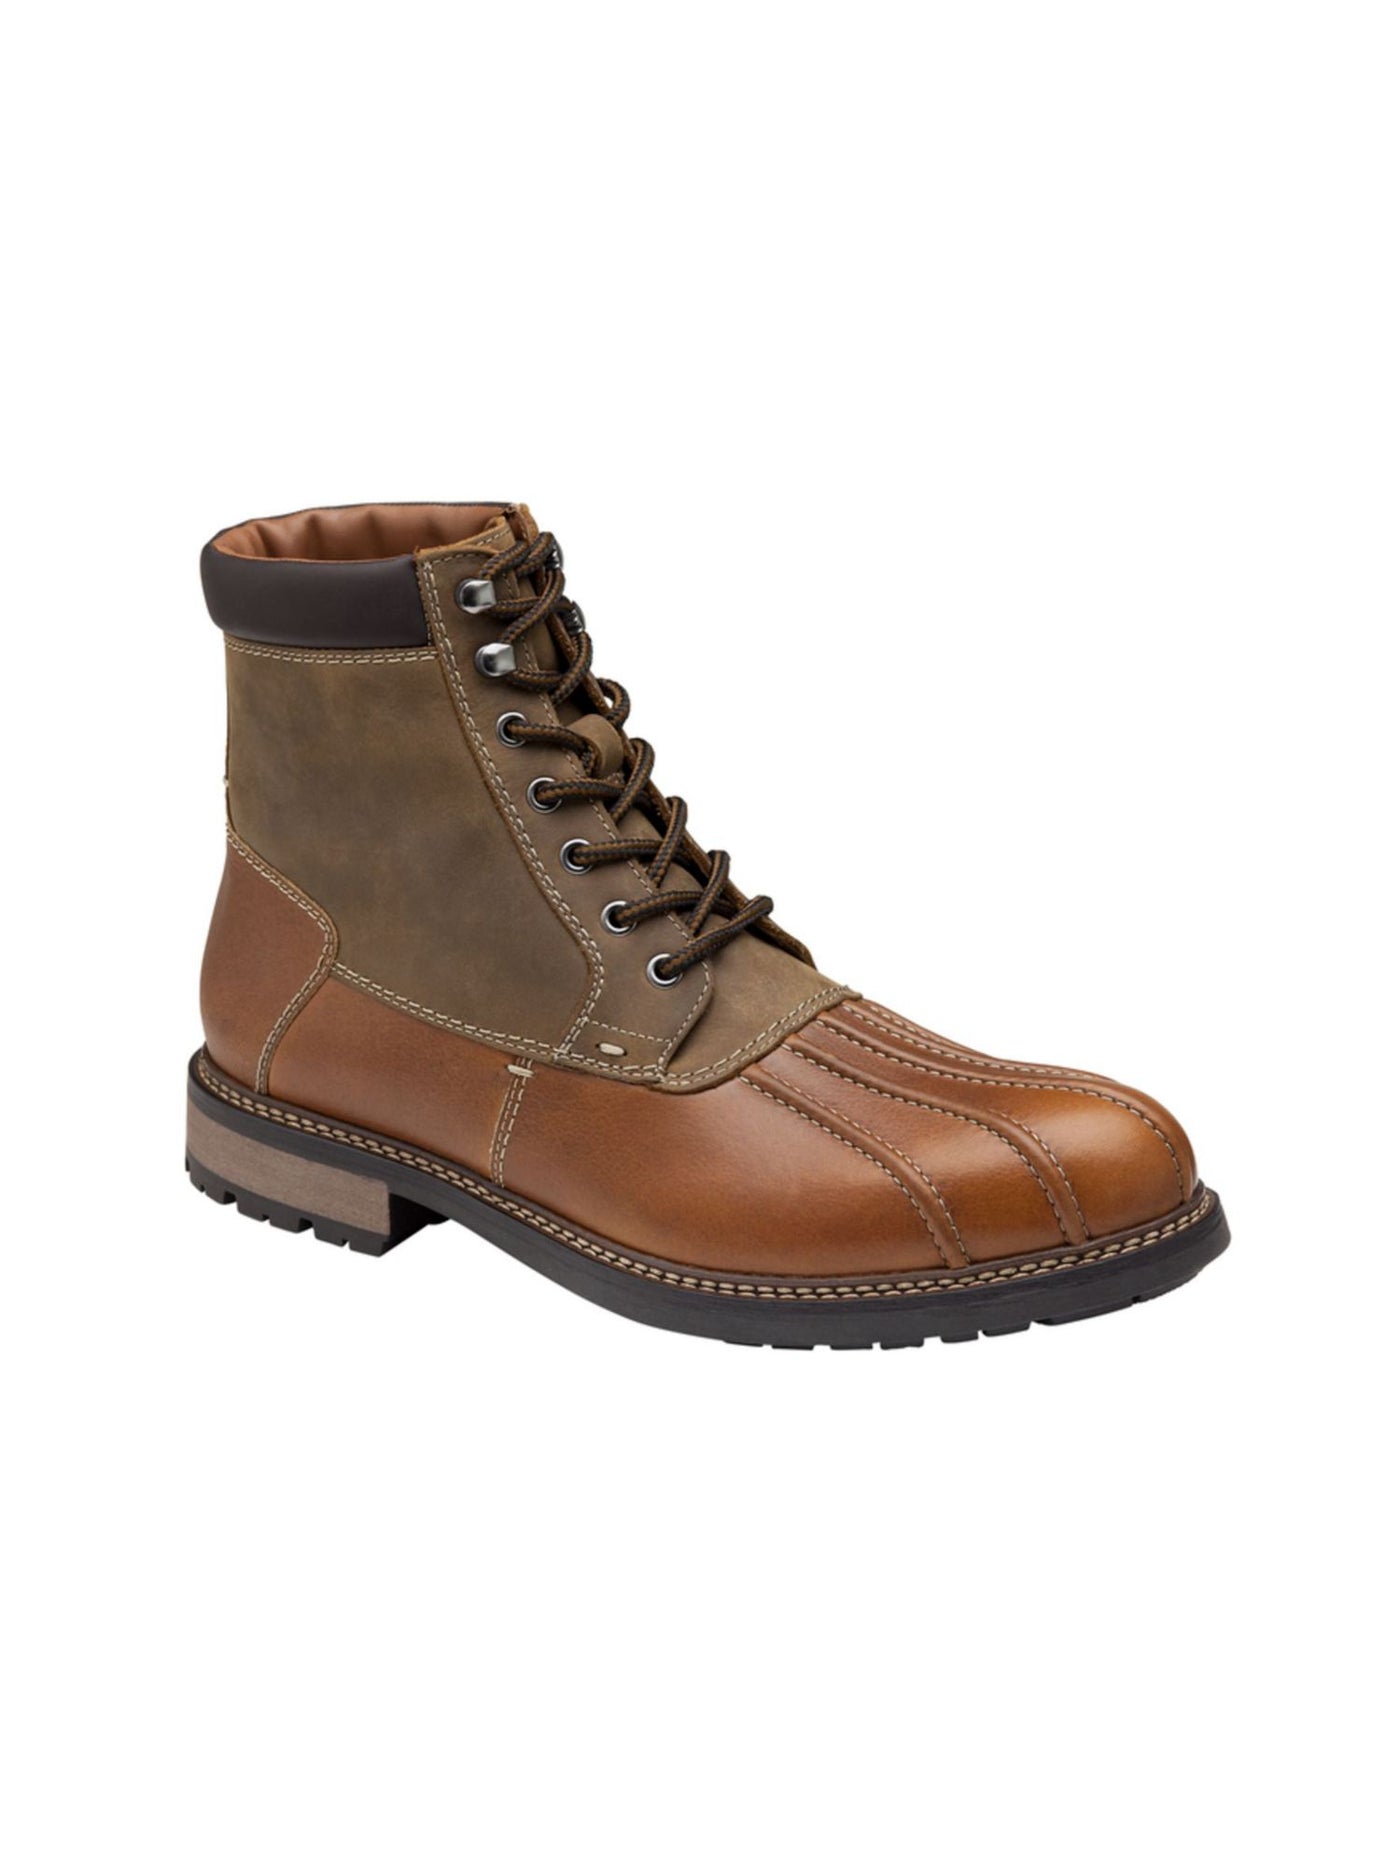 JOHNSTON & MURPHY Mens Brown Water Resistant Winstead Round Toe Lace-Up Leather Duck Boots 10 M